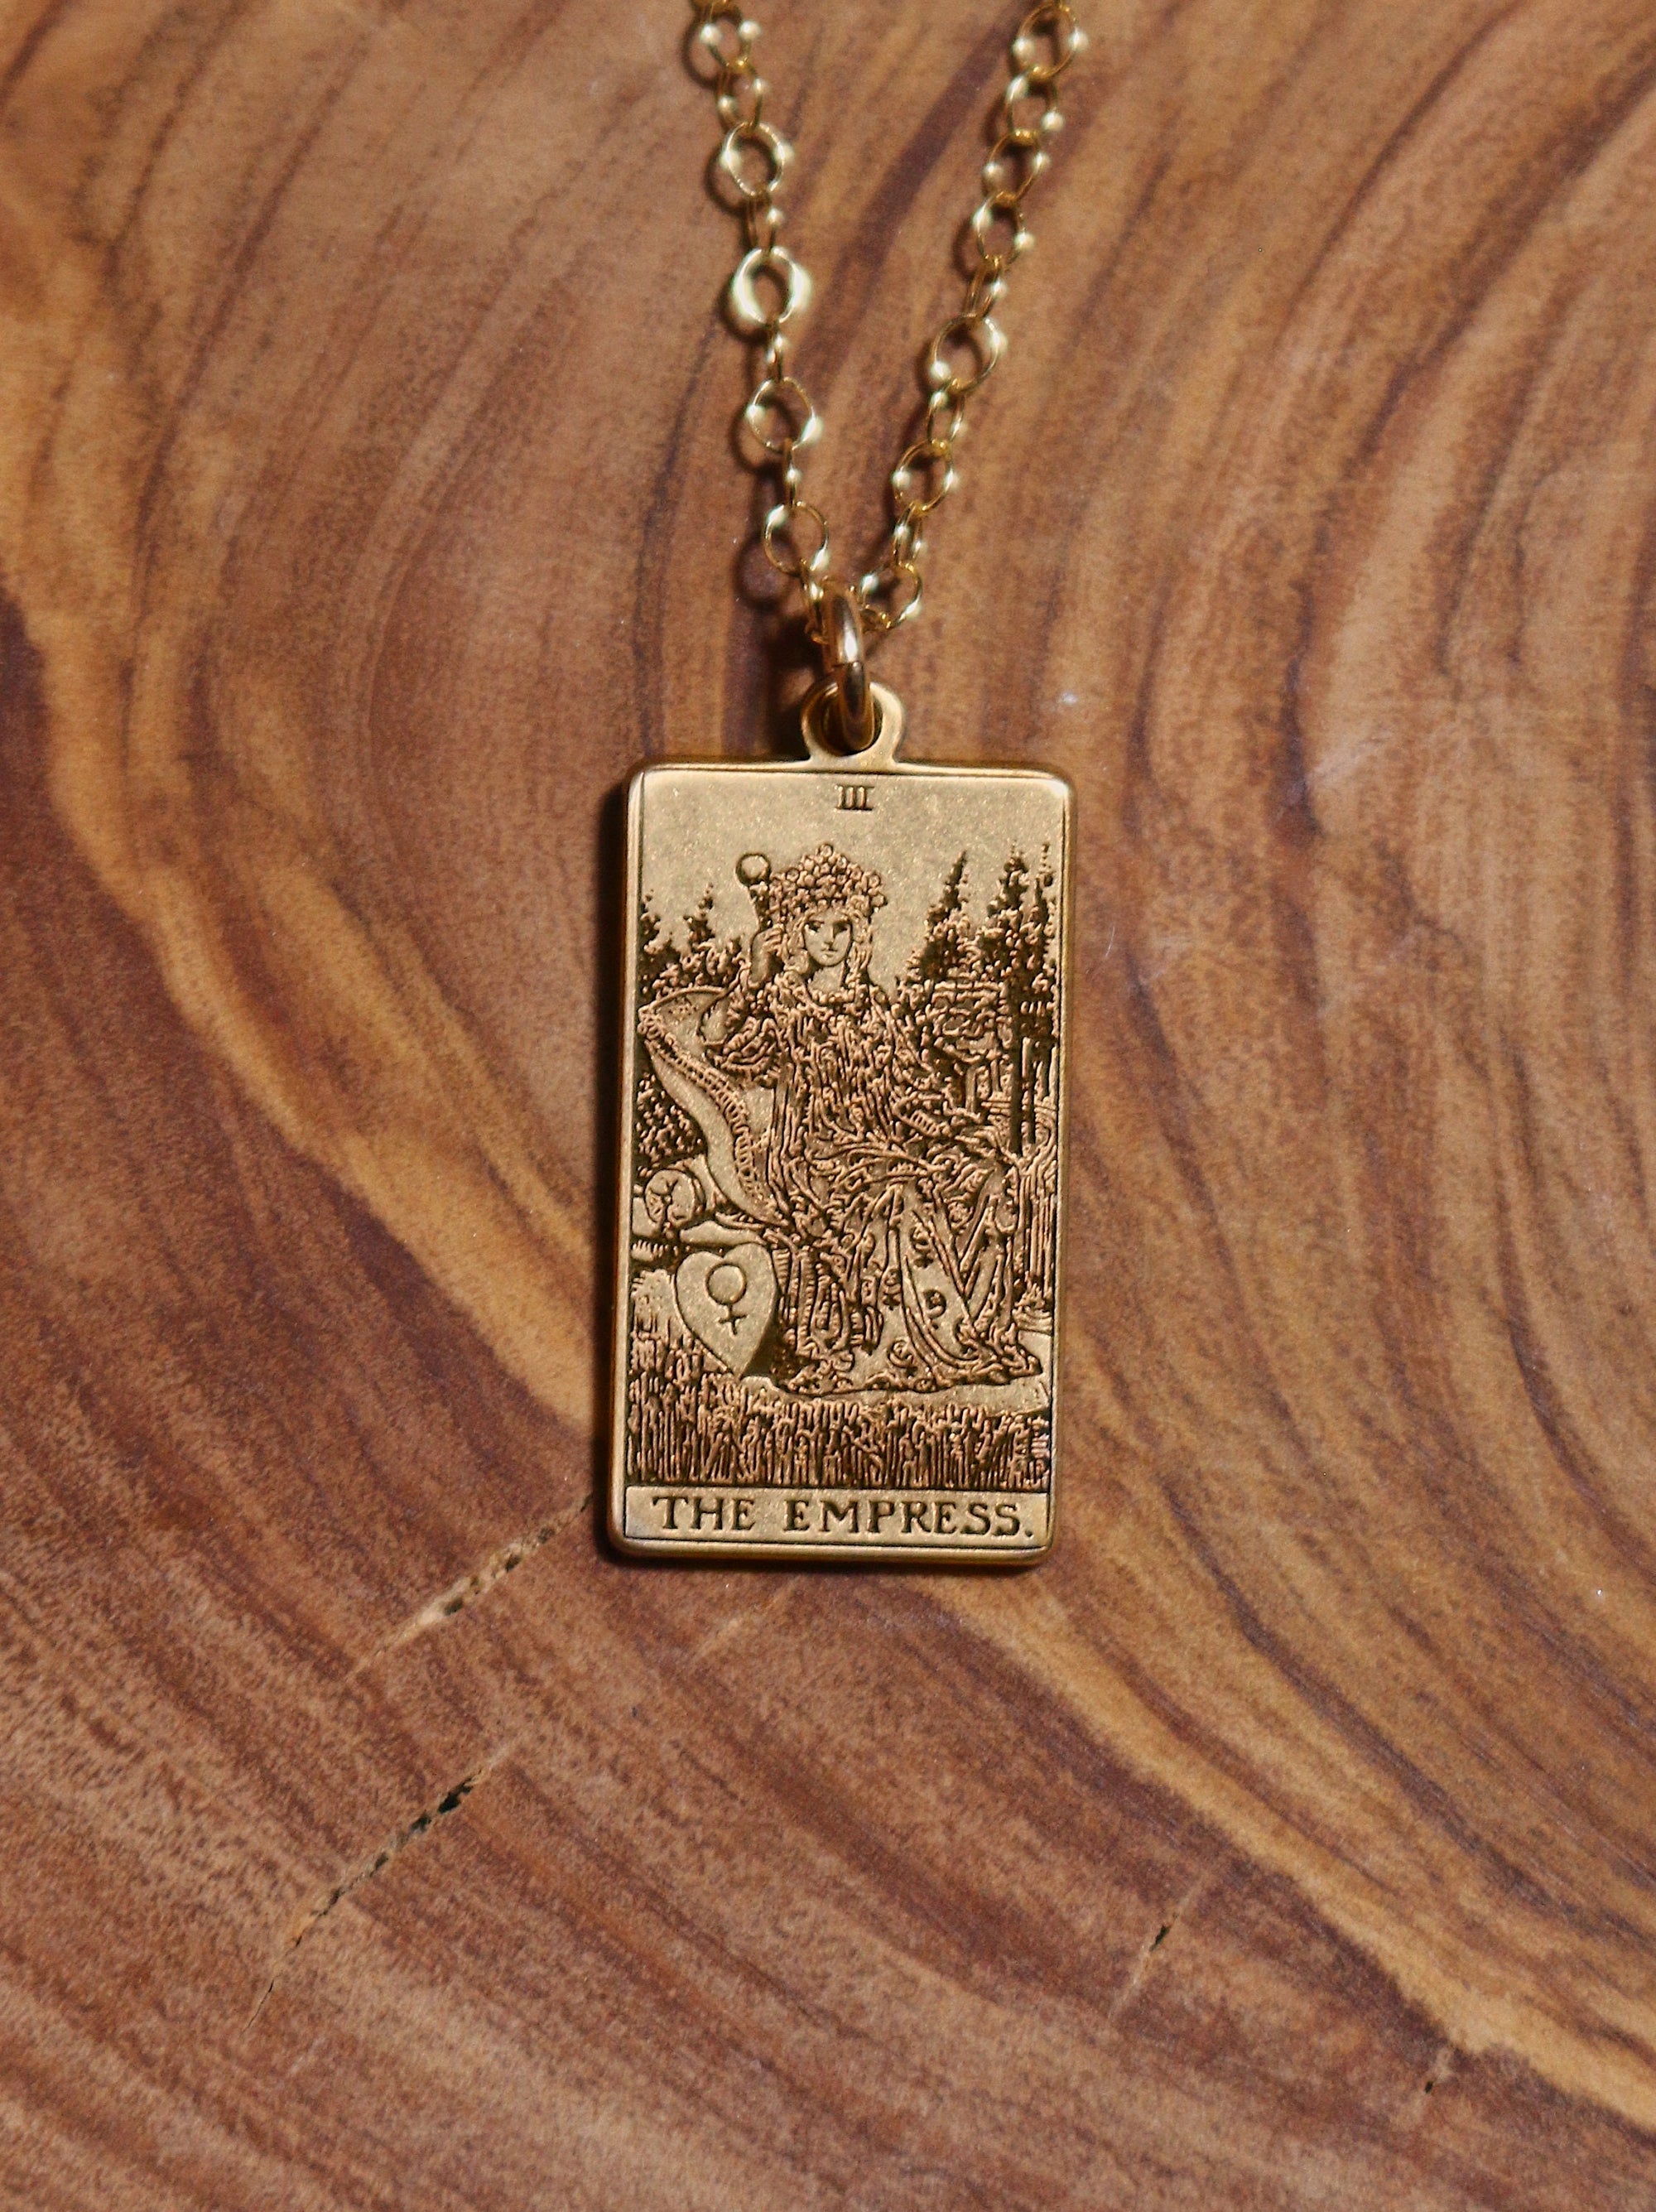 22 CARDS: Dainty Tarot Card Gold Filled Charm Necklace | Best Friend Birthday Gift | Gold Tarot Card Necklace | Celestial Mystic Jewelry